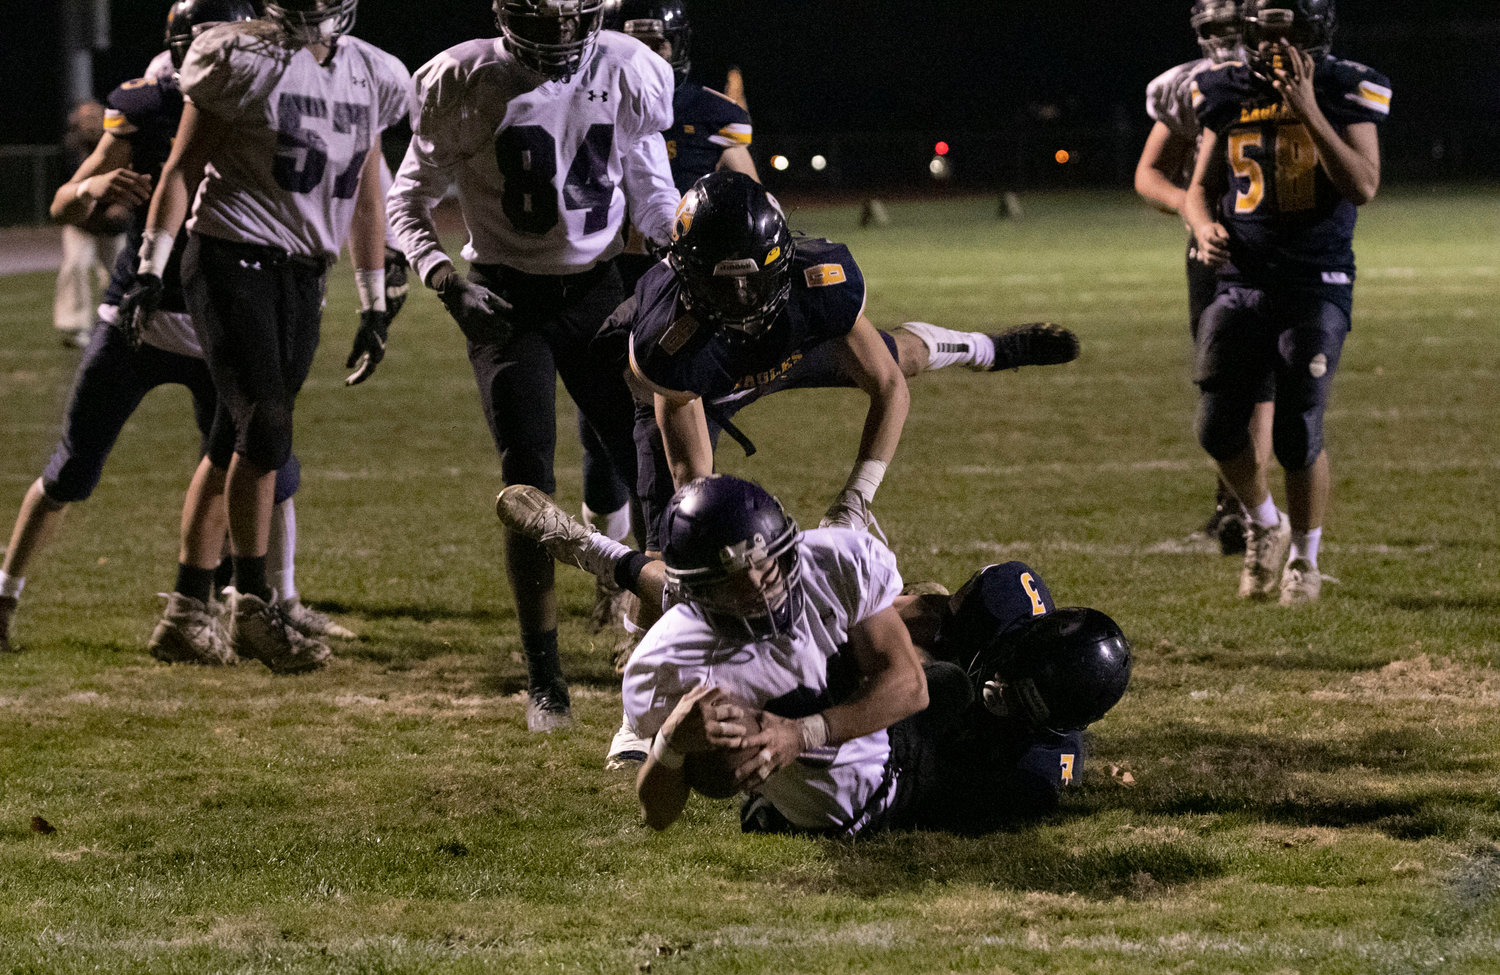 Huskies running back Nikolas DaSilva heads for the end zone, but is stopped short on the one yard line.